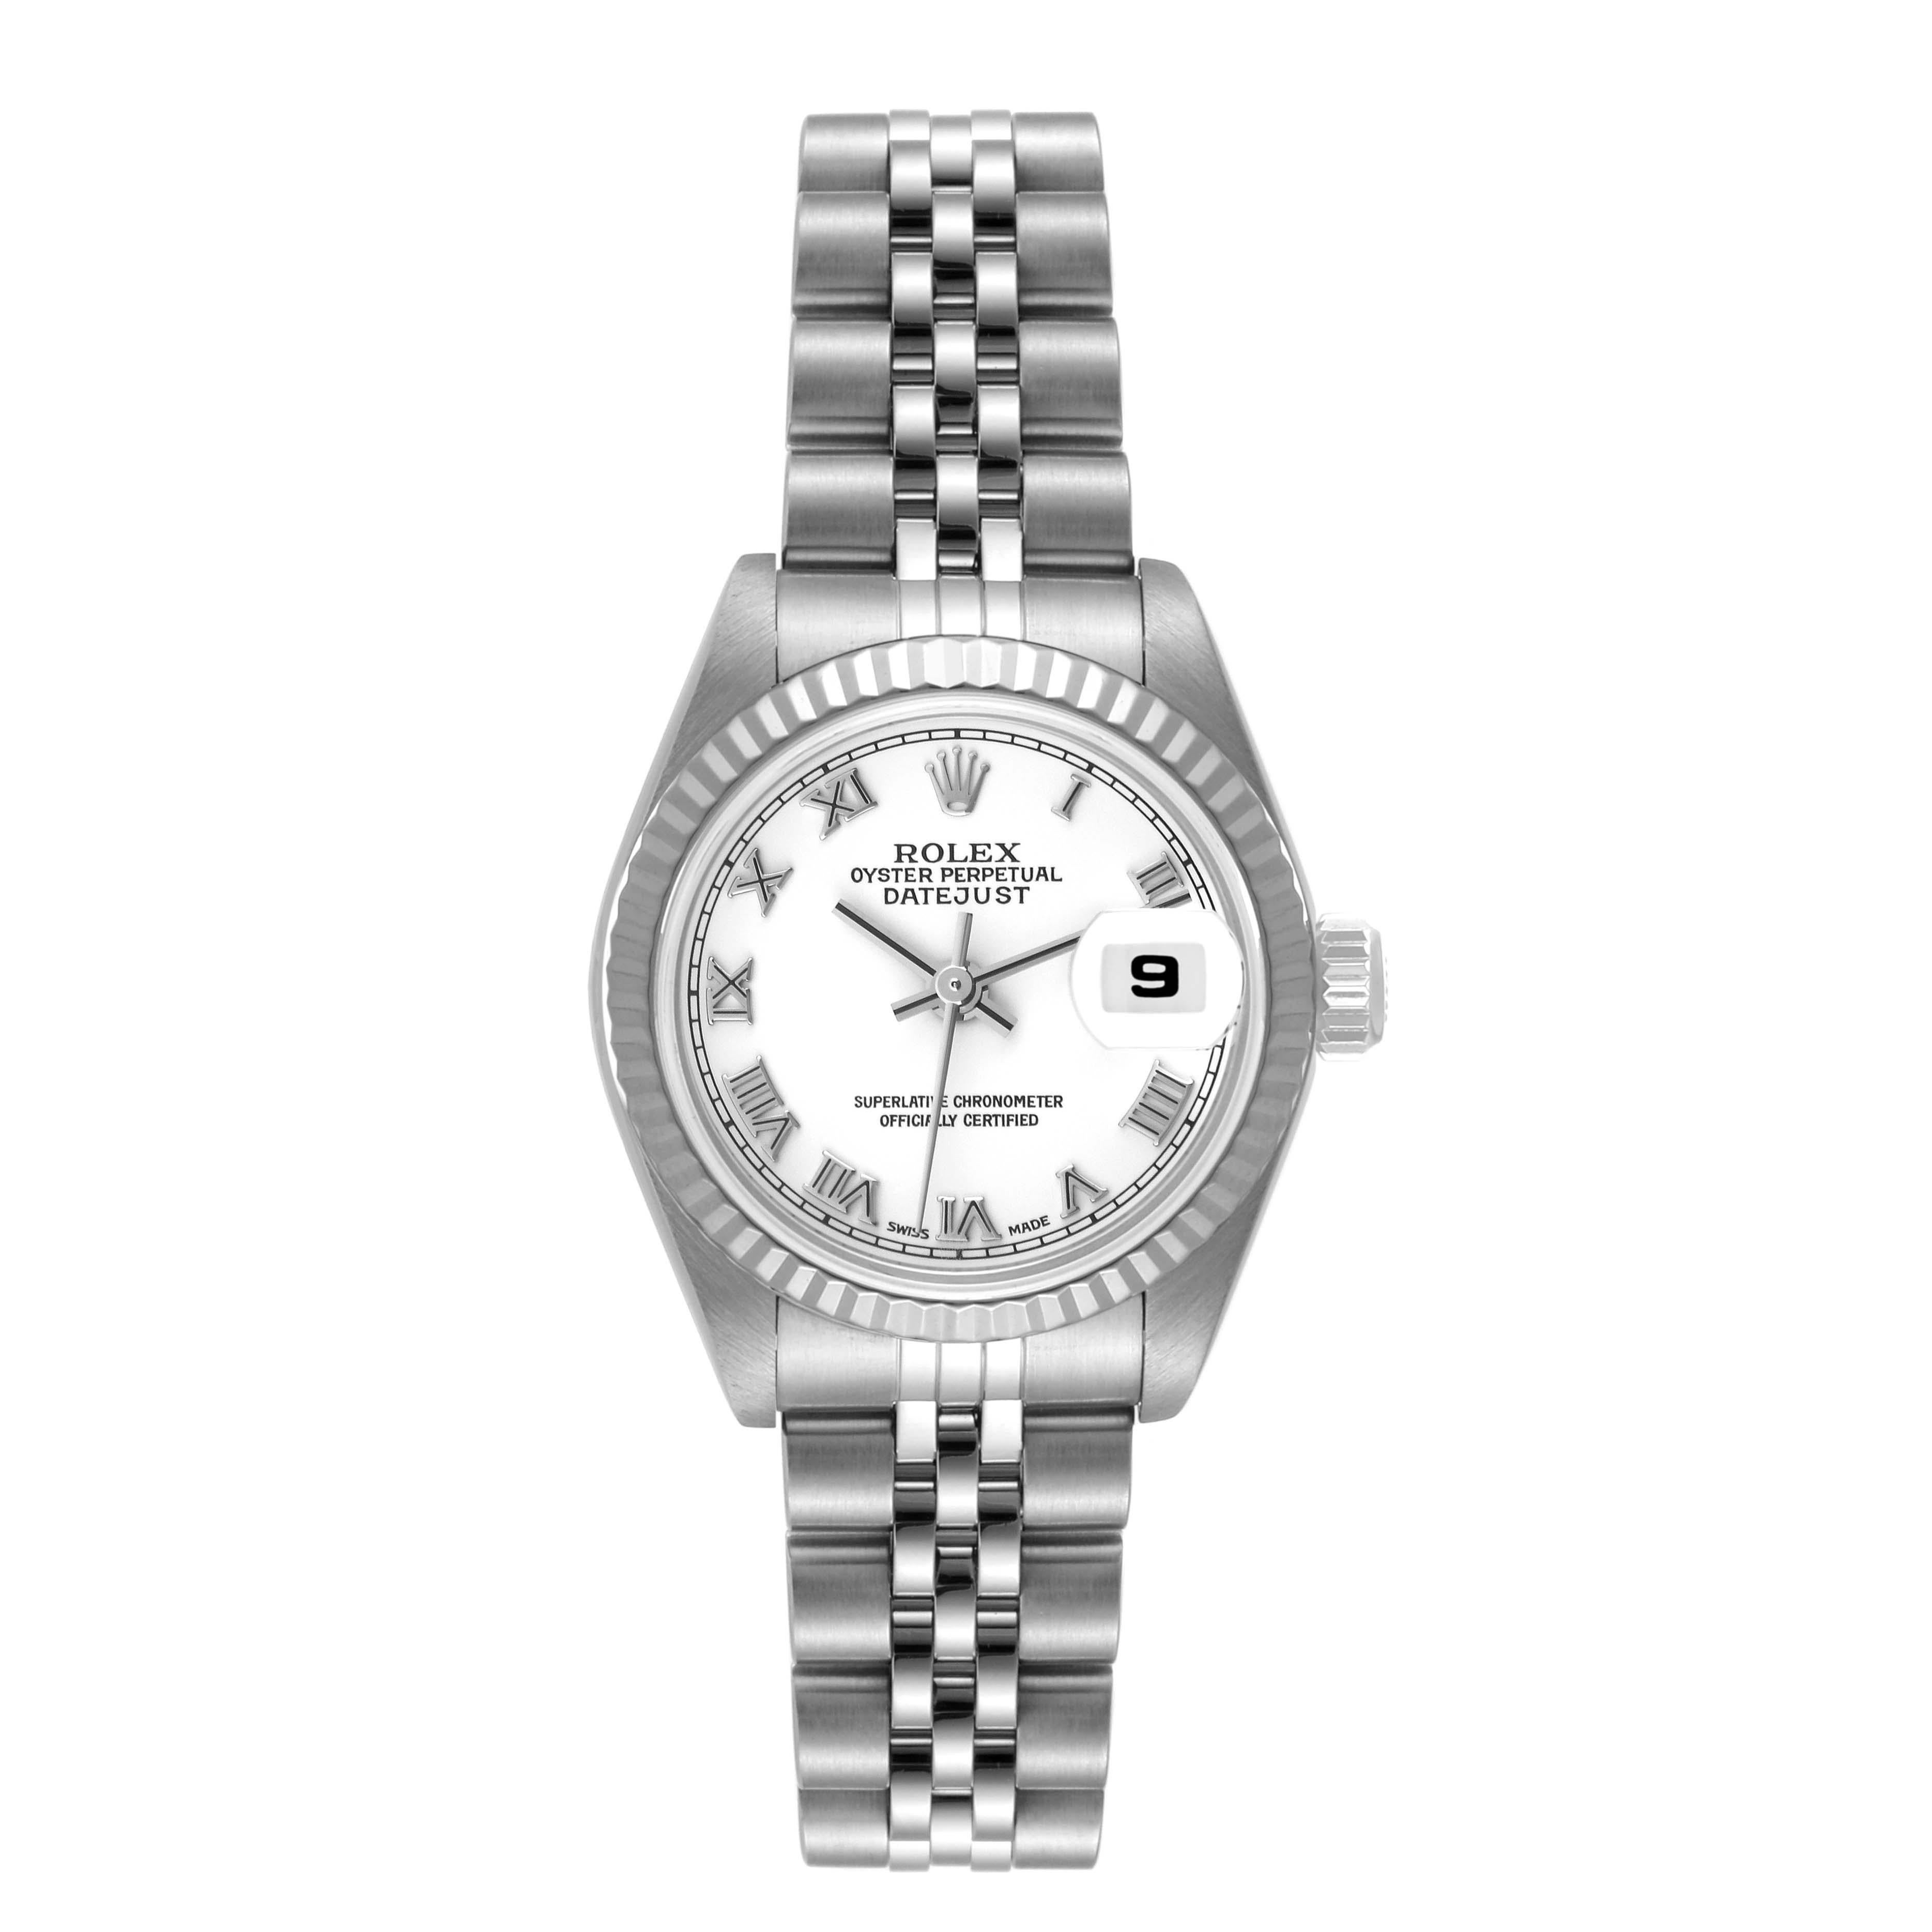 Rolex Datejust White Gold Roman Dial Steel Ladies Watch 79174. Officially certified chronometer automatic self-winding movement. Stainless steel oyster case 26.0 mm in diameter. Rolex logo on the crown. 18K white gold fluted bezel. Scratch resistant